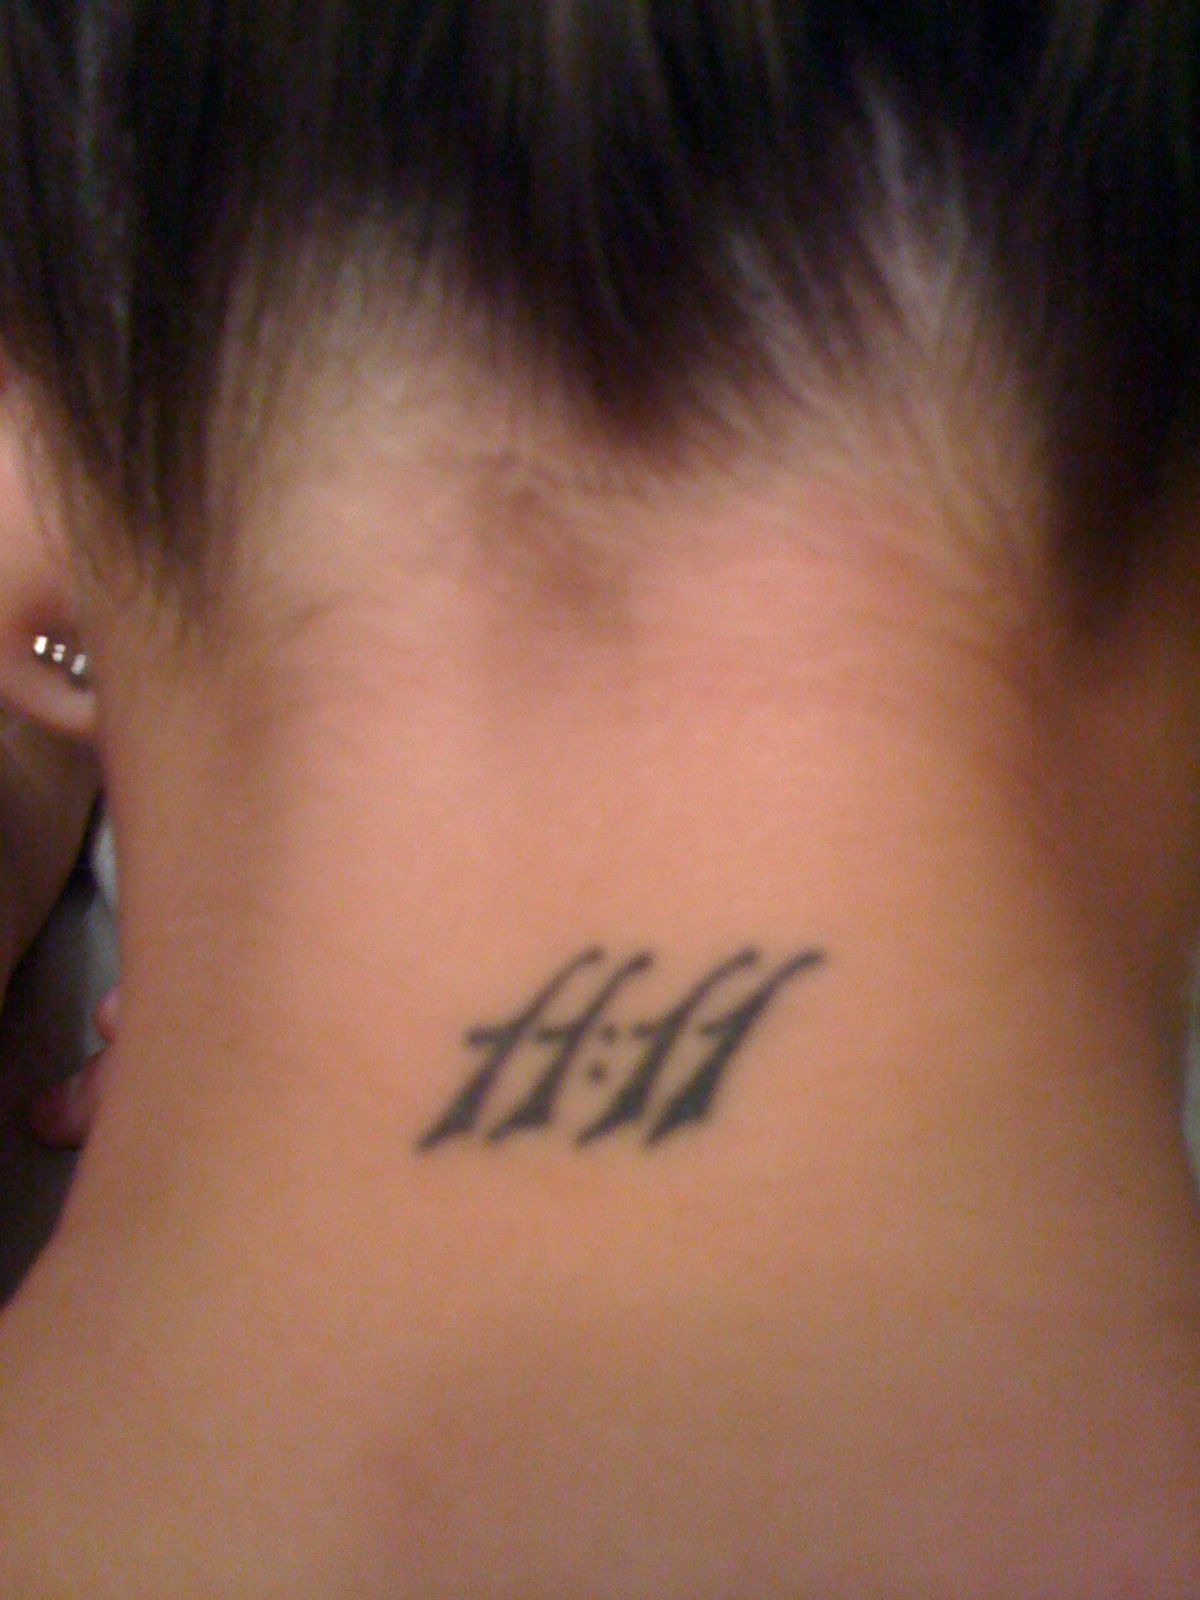 Back Of The Neck 1111 Tattoo